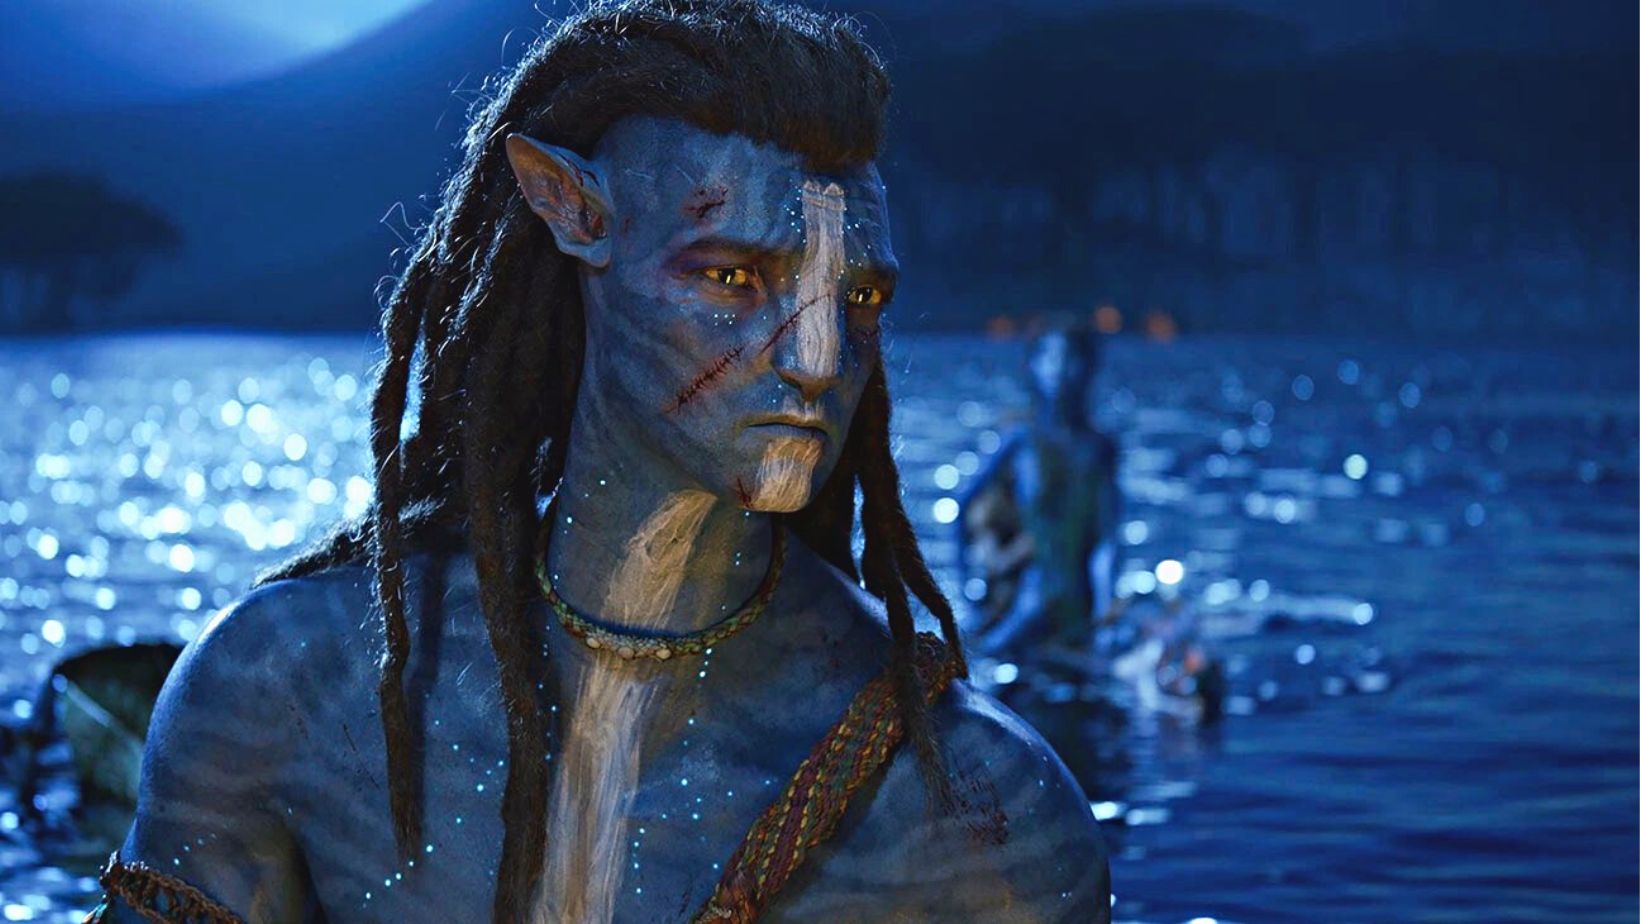 Avatar 2 on track to set more records